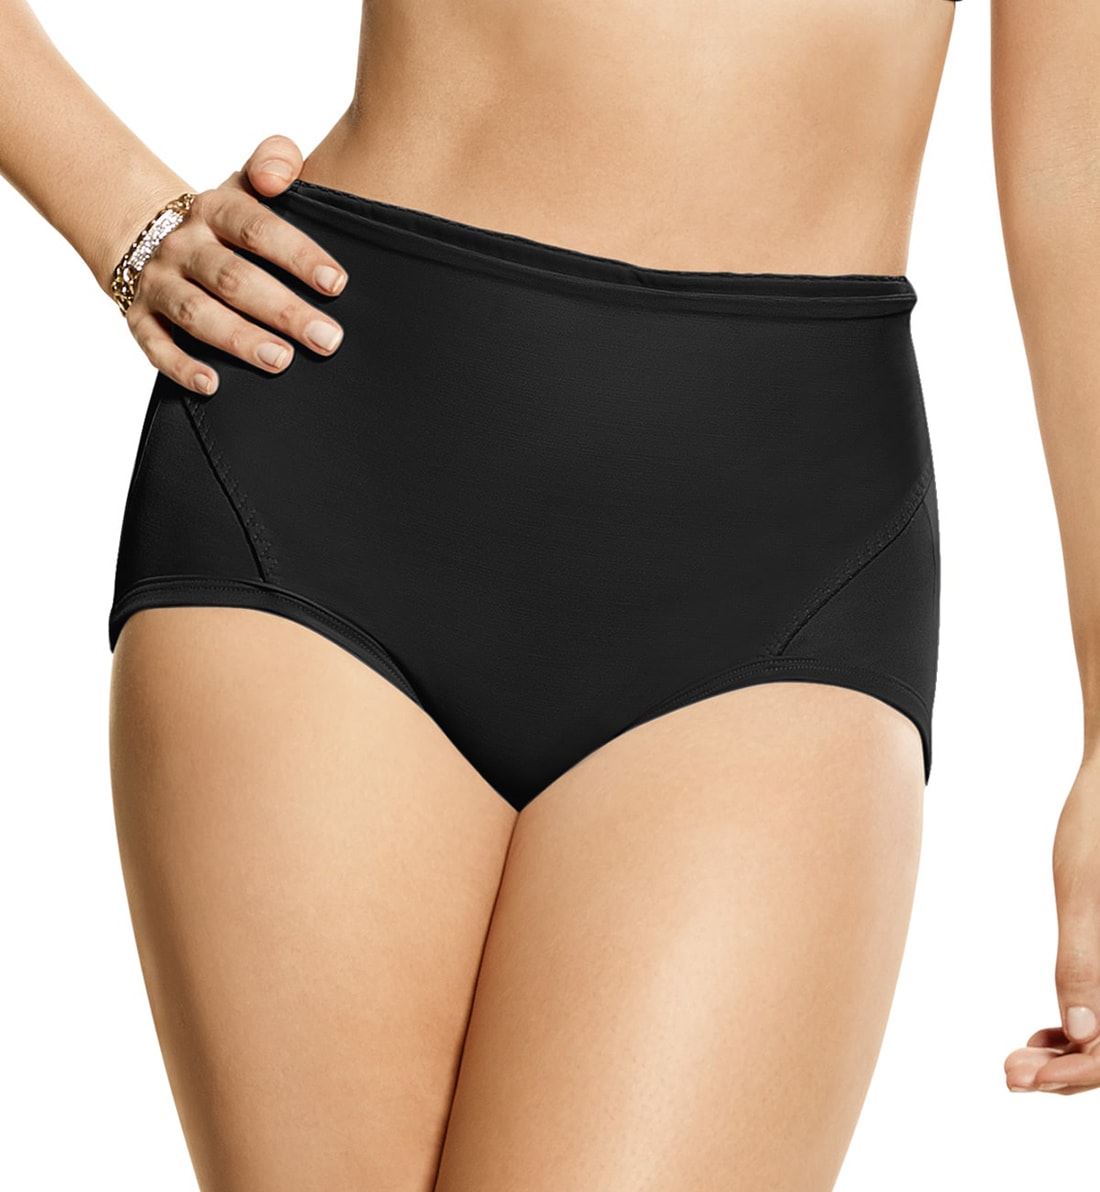 Leonisa Postpartum Panty with Adjustable Belly Wrap (012400),Small,Black - Black,Small